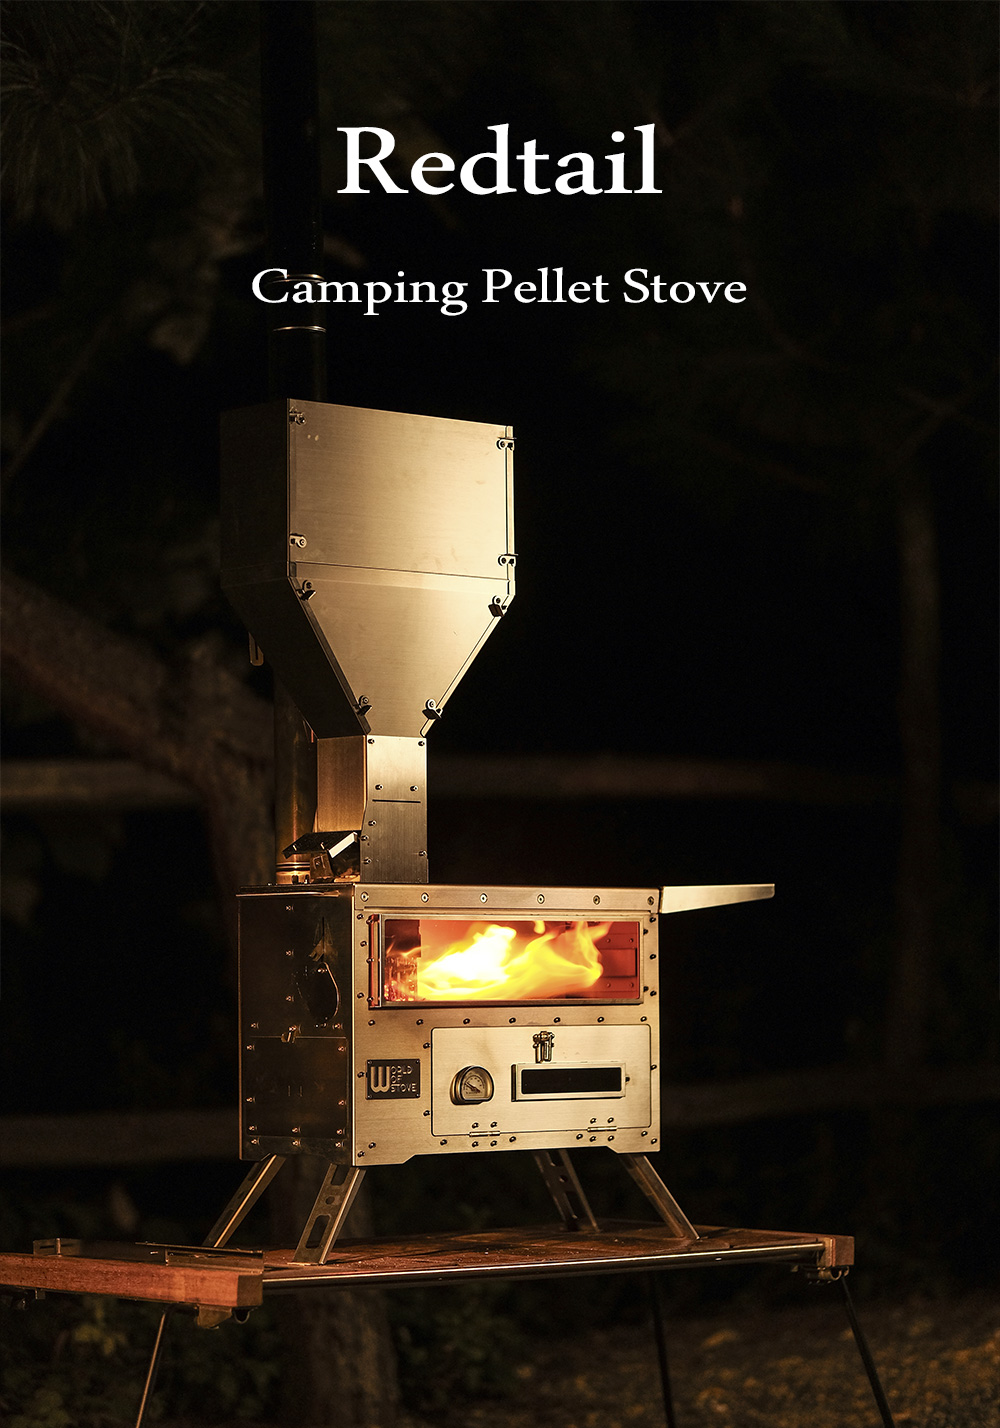 redtail camping pellet stove